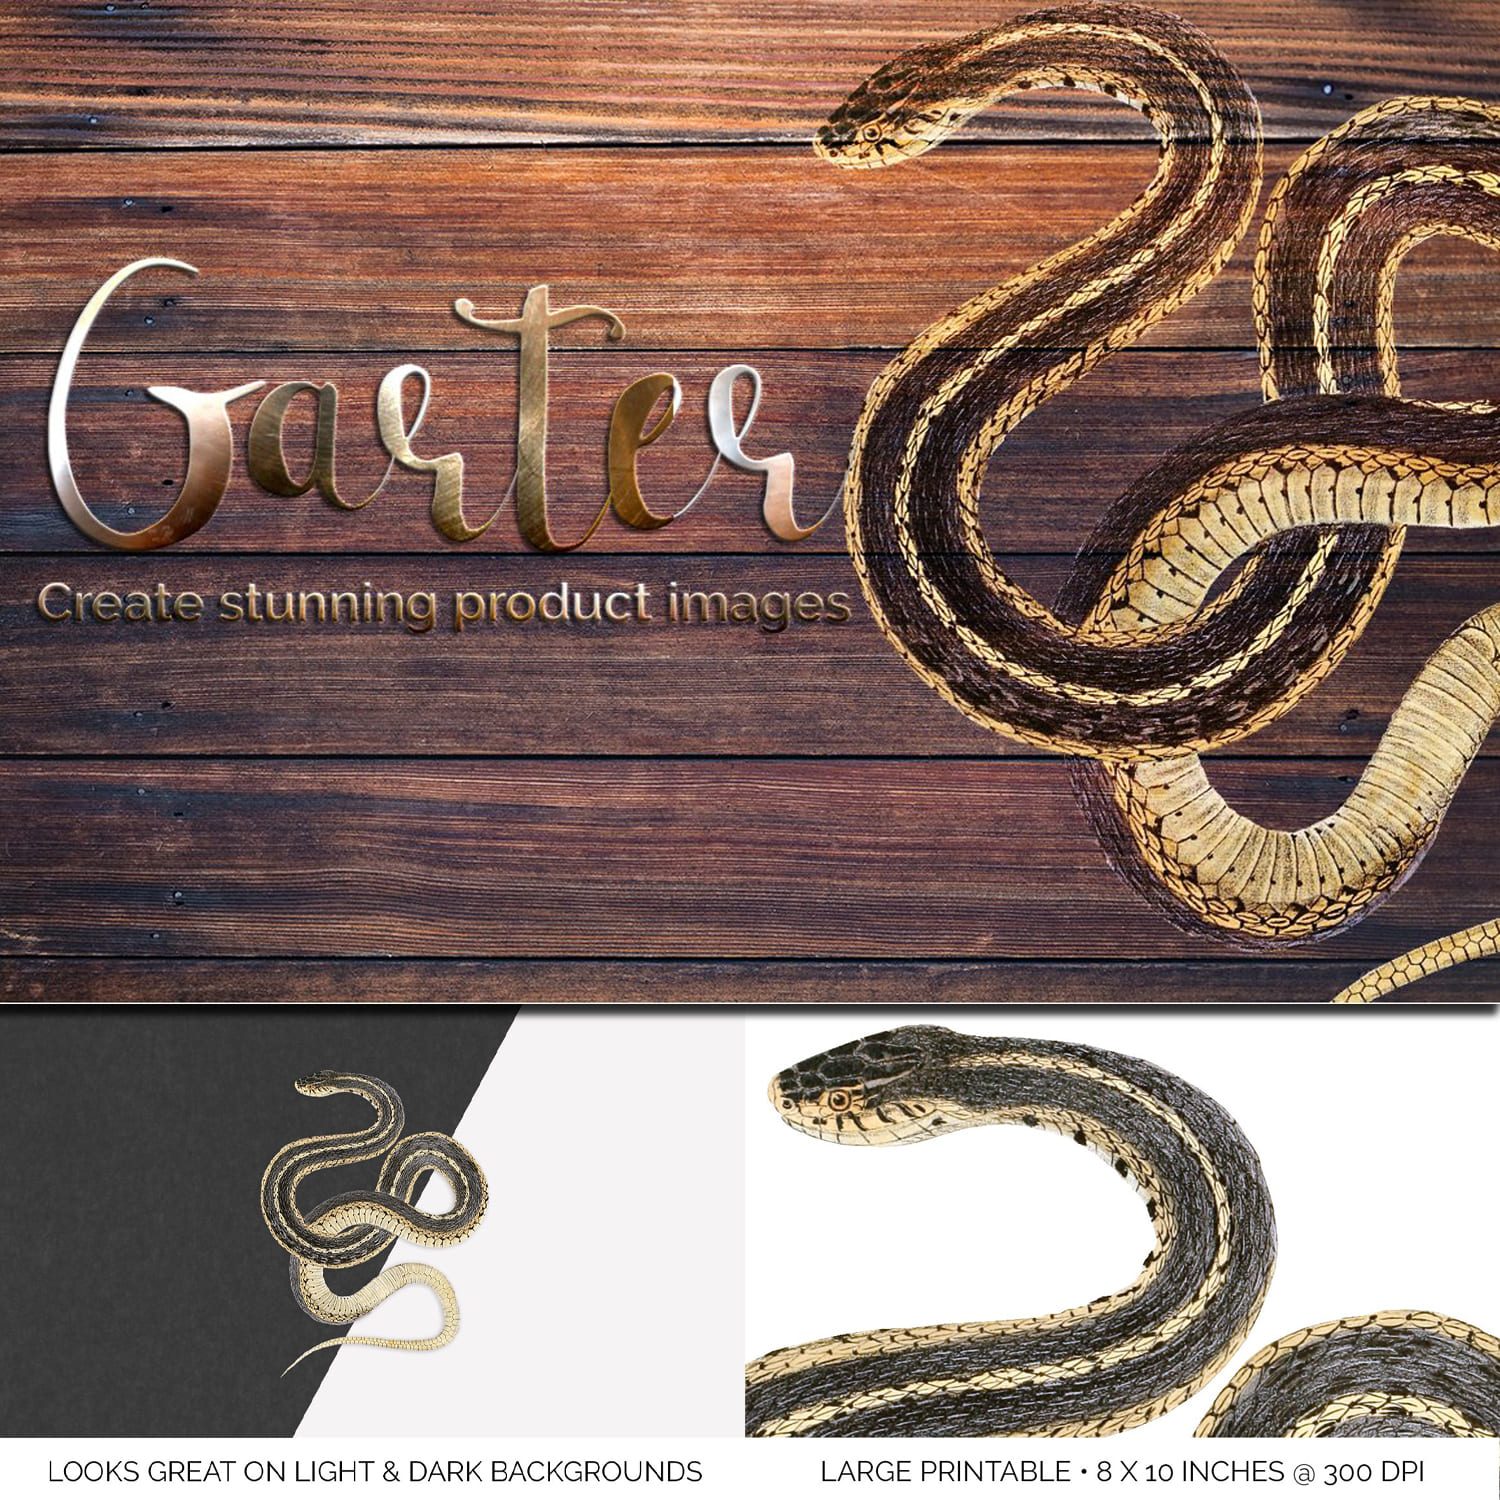 The image of a beautiful snake on the background of wood.